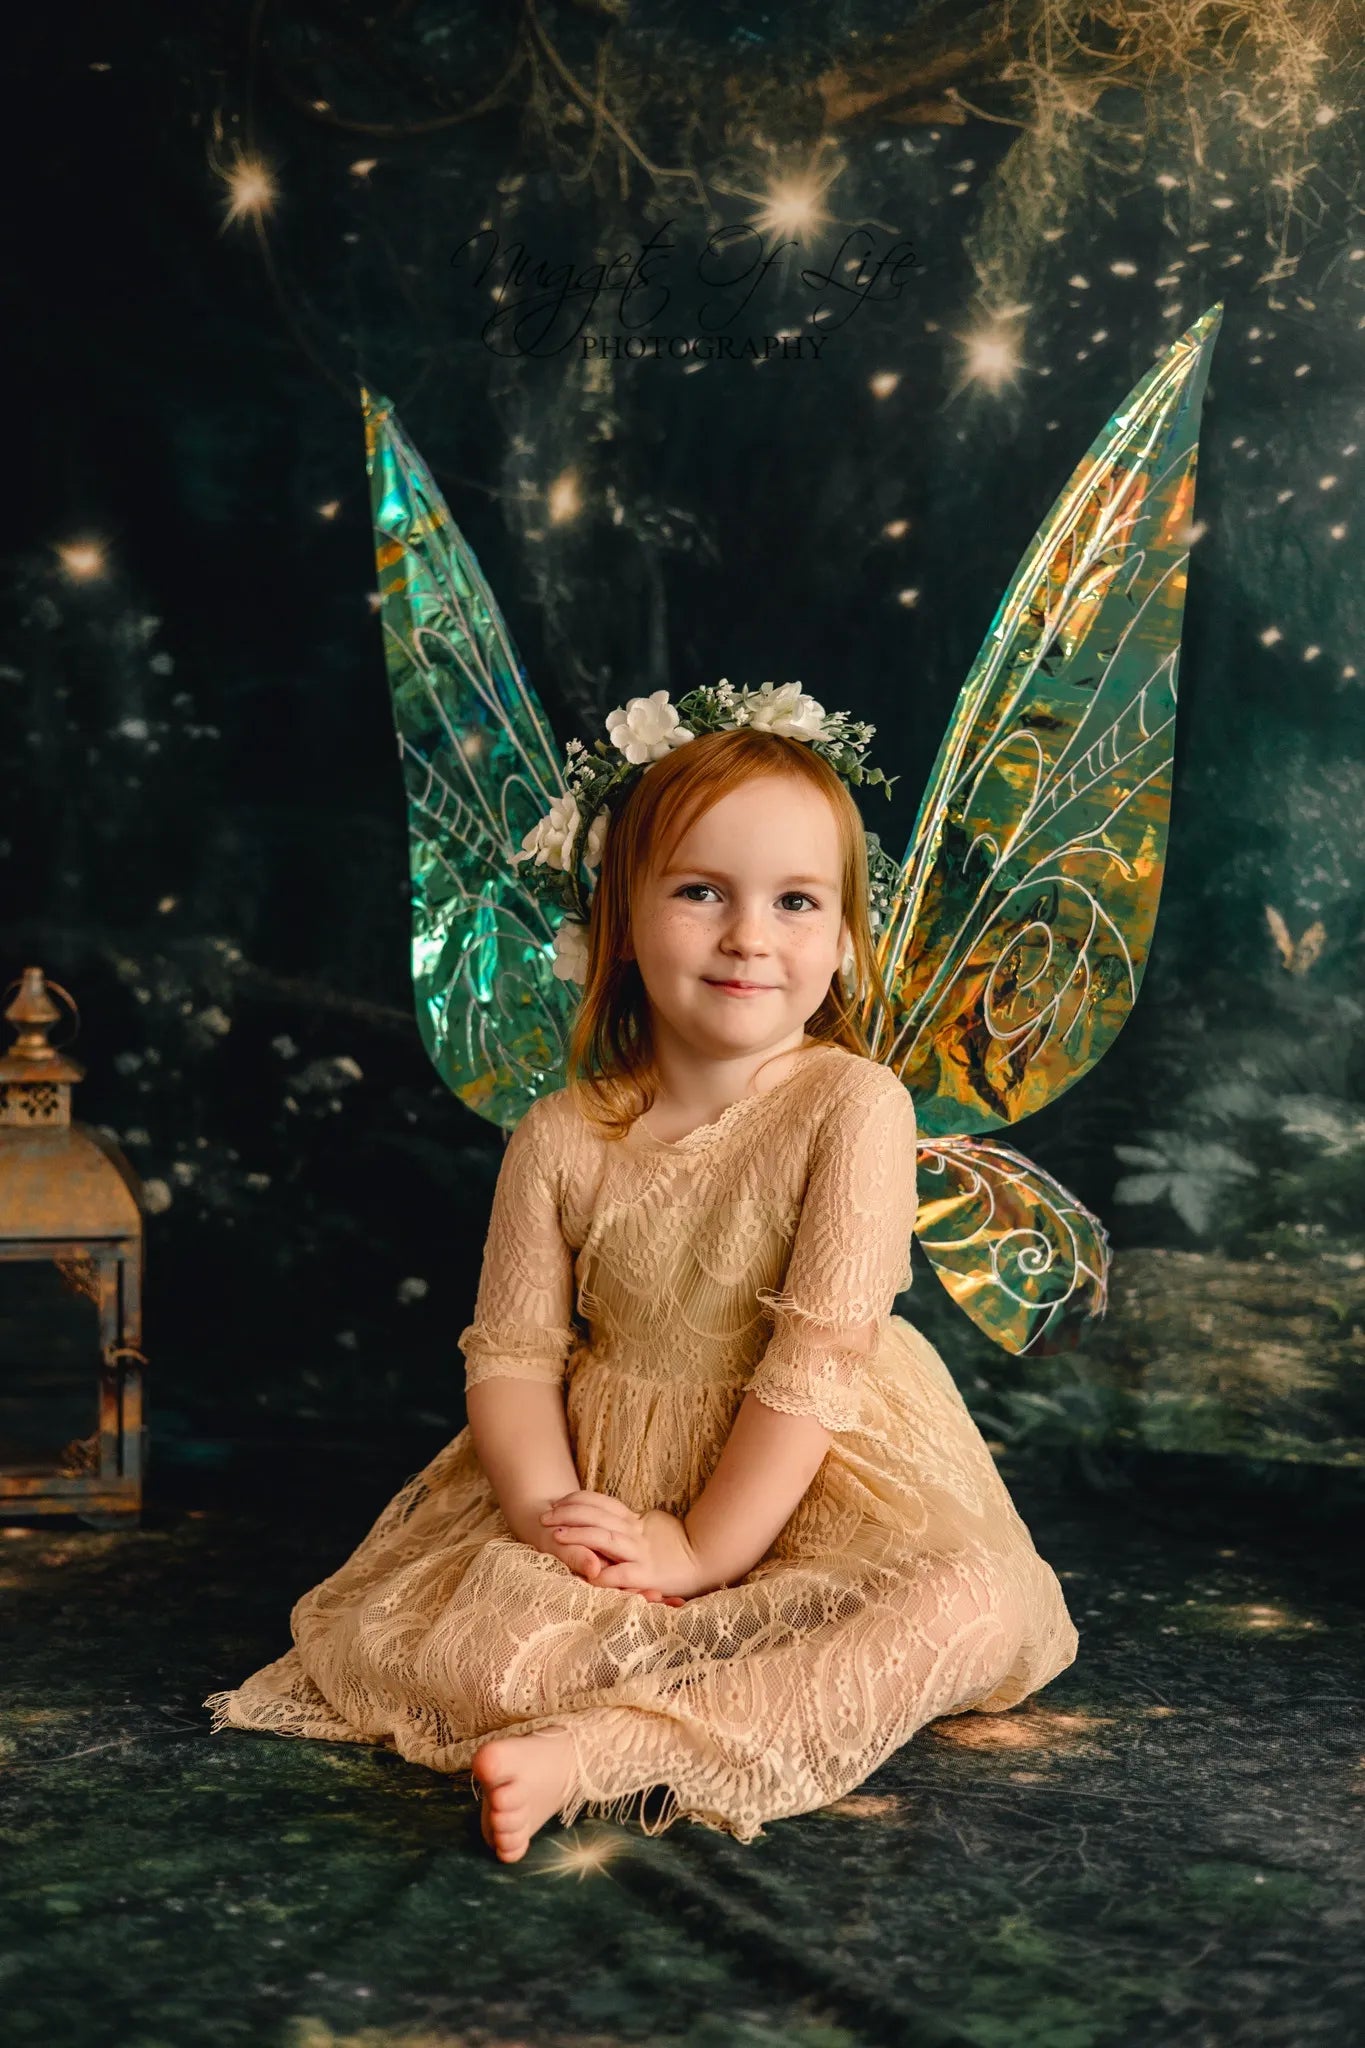 Kate Enchanted Fairy Forest Floor at Night Lights Backdrop Designed by Mandy Ringe Photography